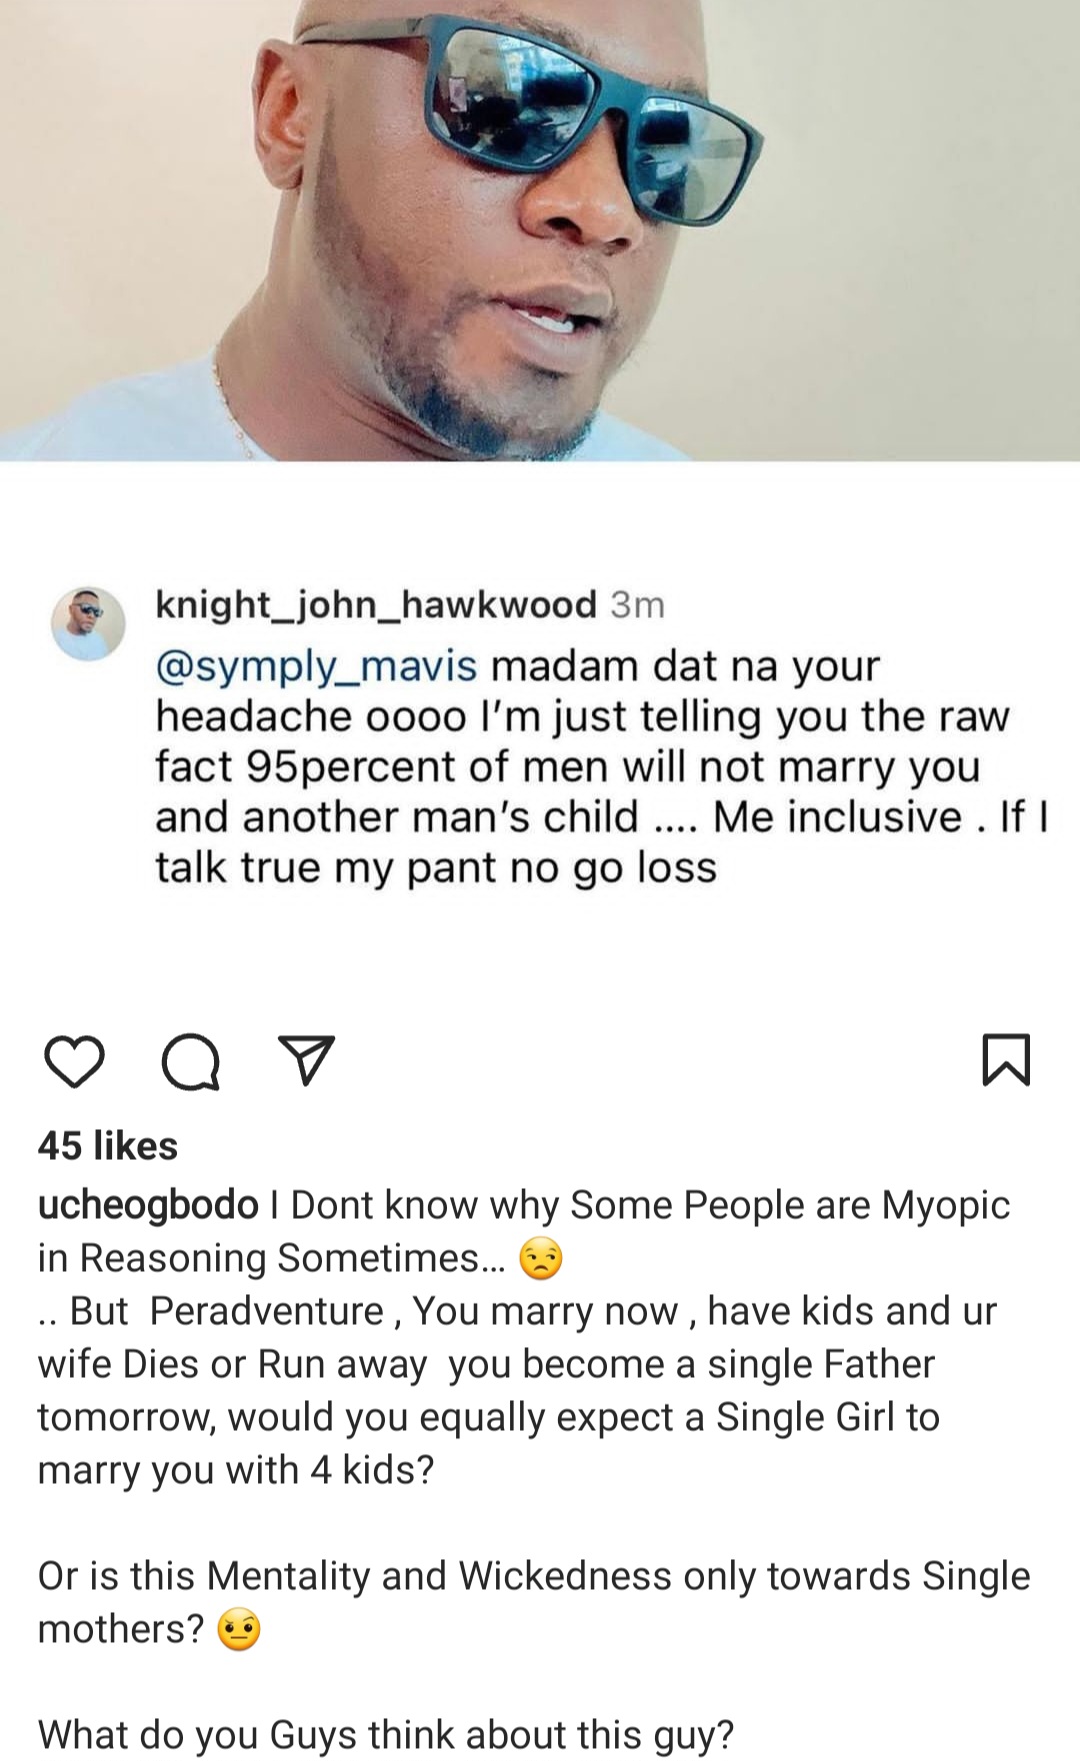 "I don't know why some people are myopic" Uche Ogbodo slams man who said 95% of men will not marry single mothers